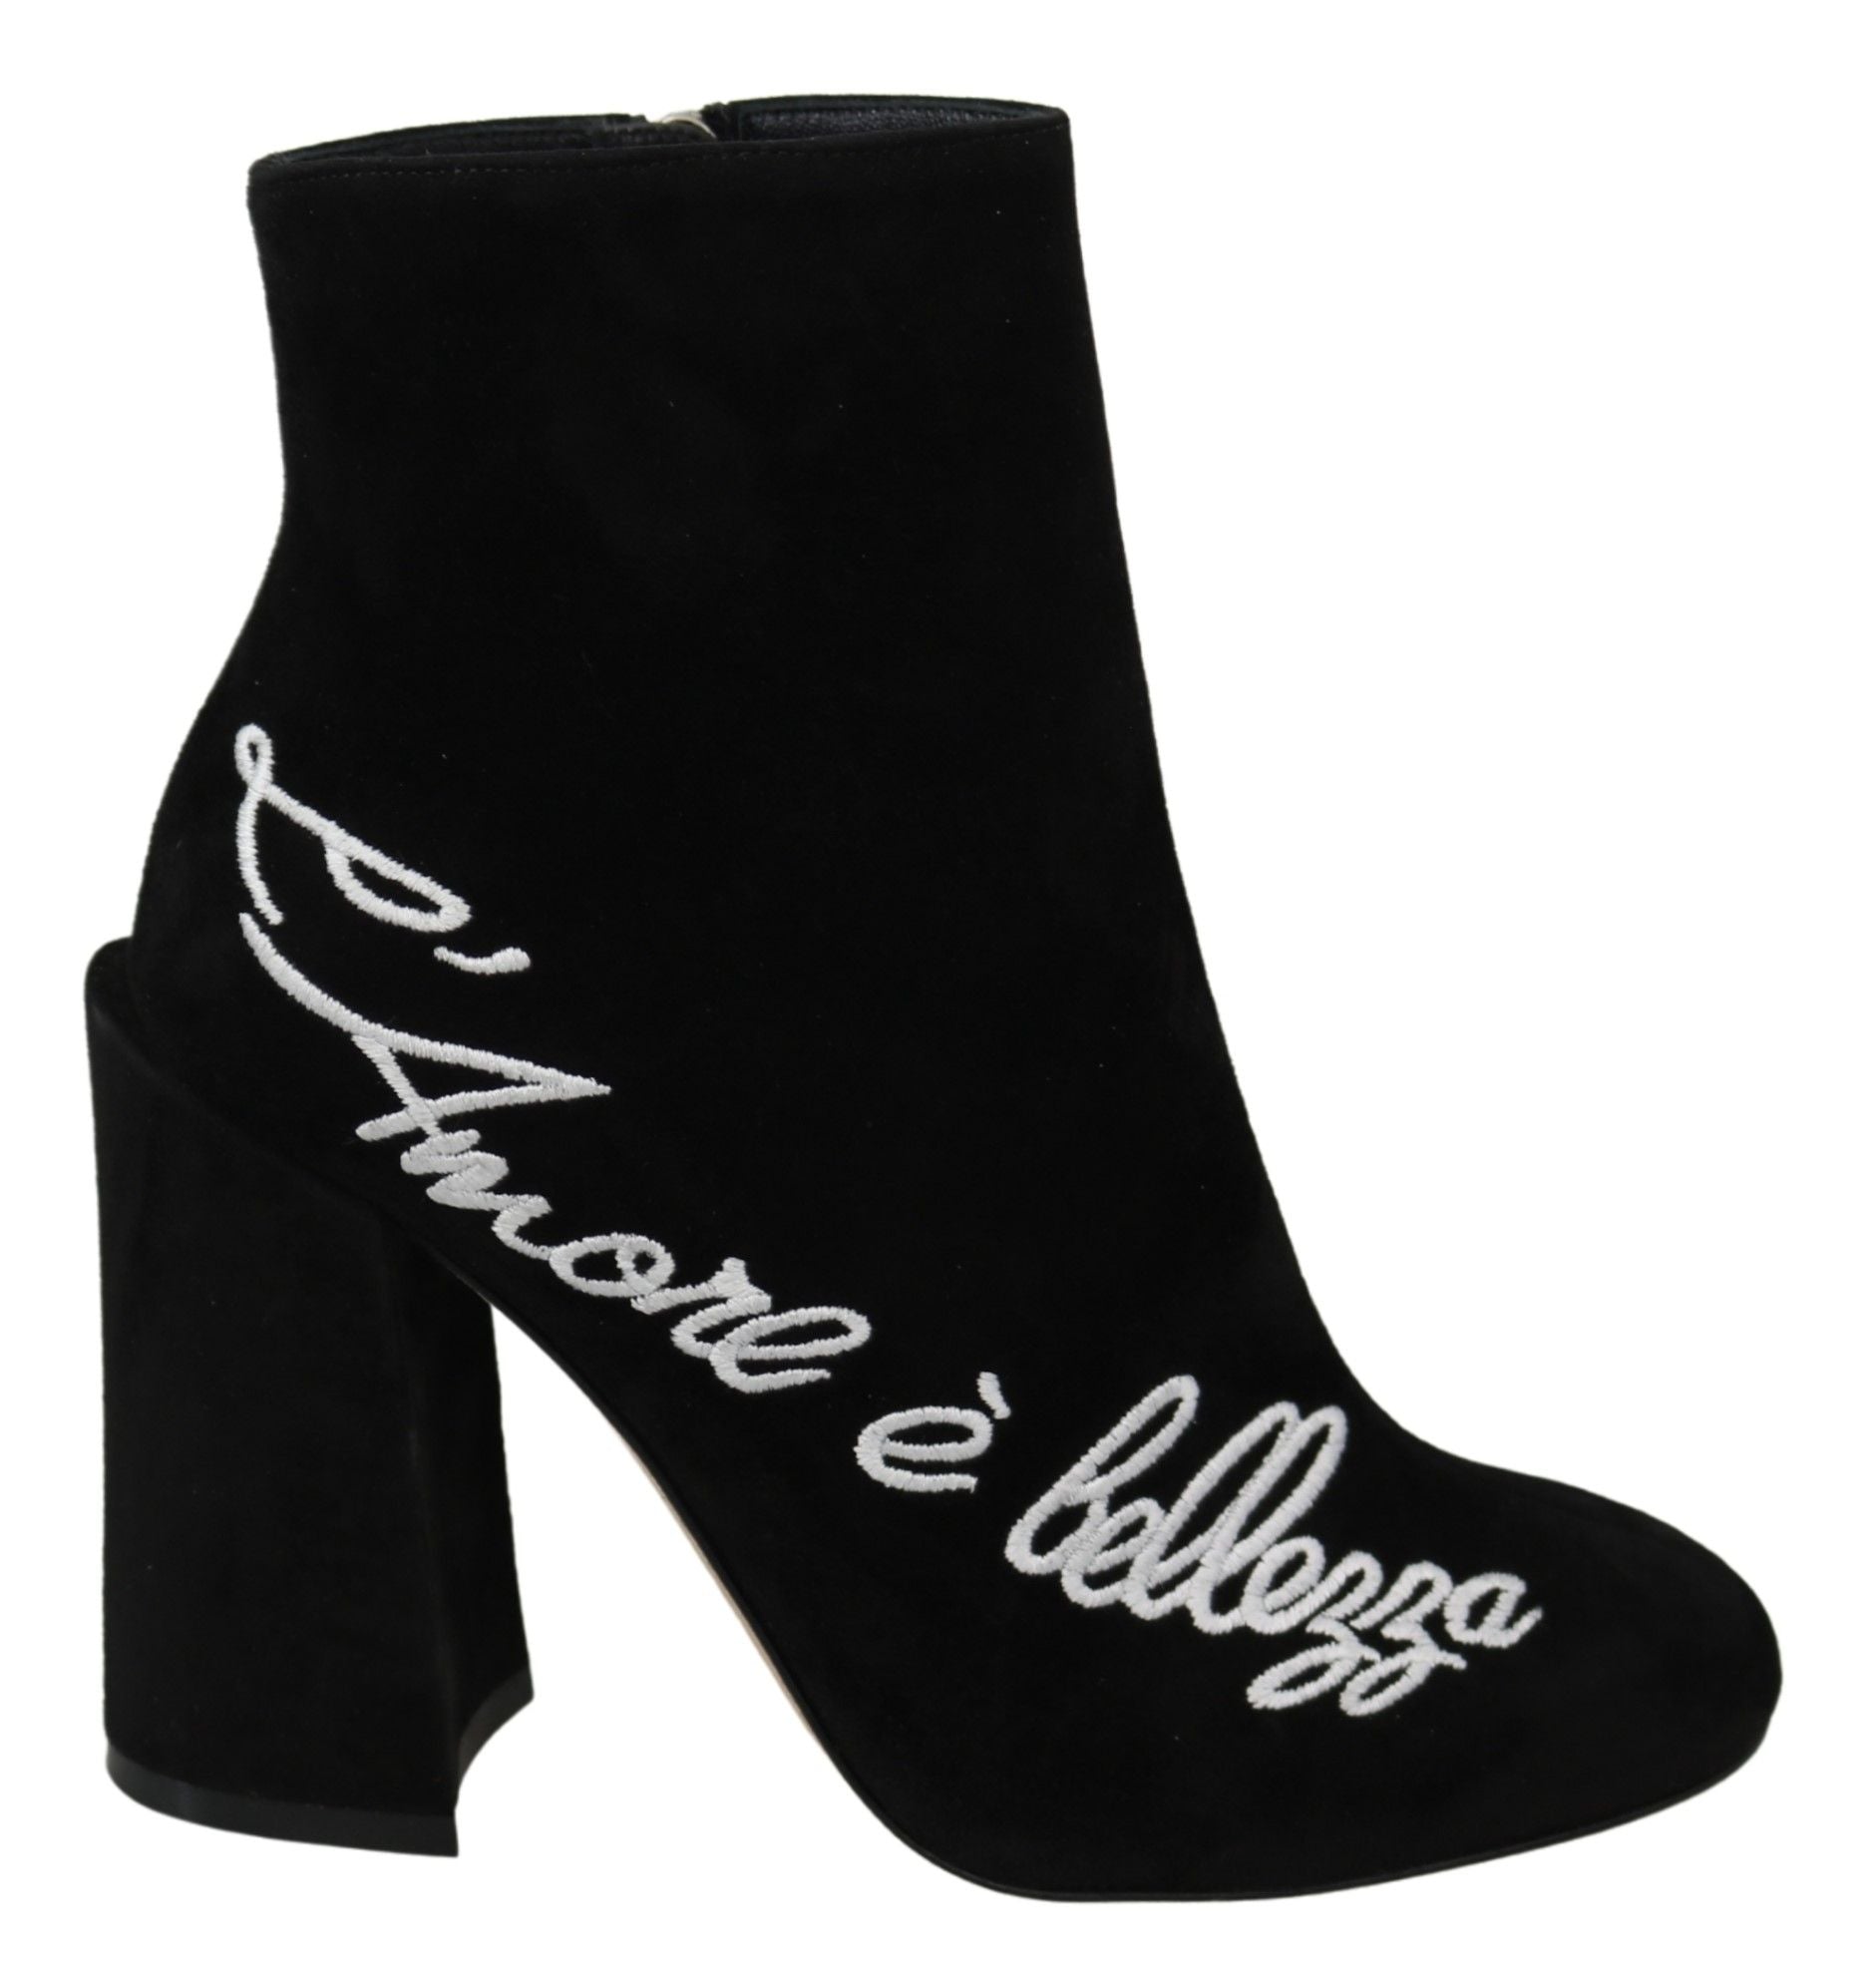 Embroidered Ankle Boots in Lambskin Suede